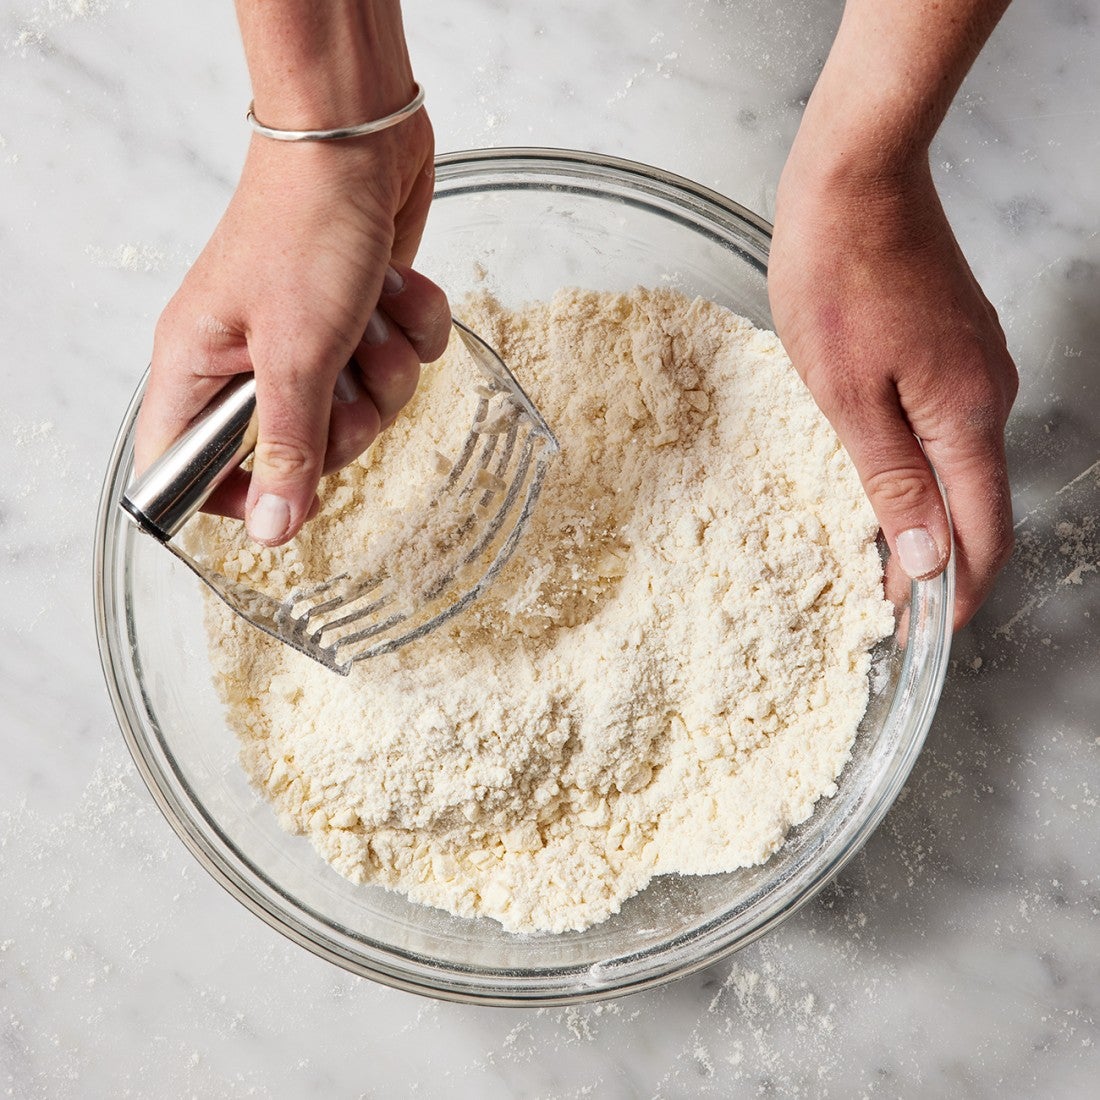 Cutting fat into dry pie crust ingredients